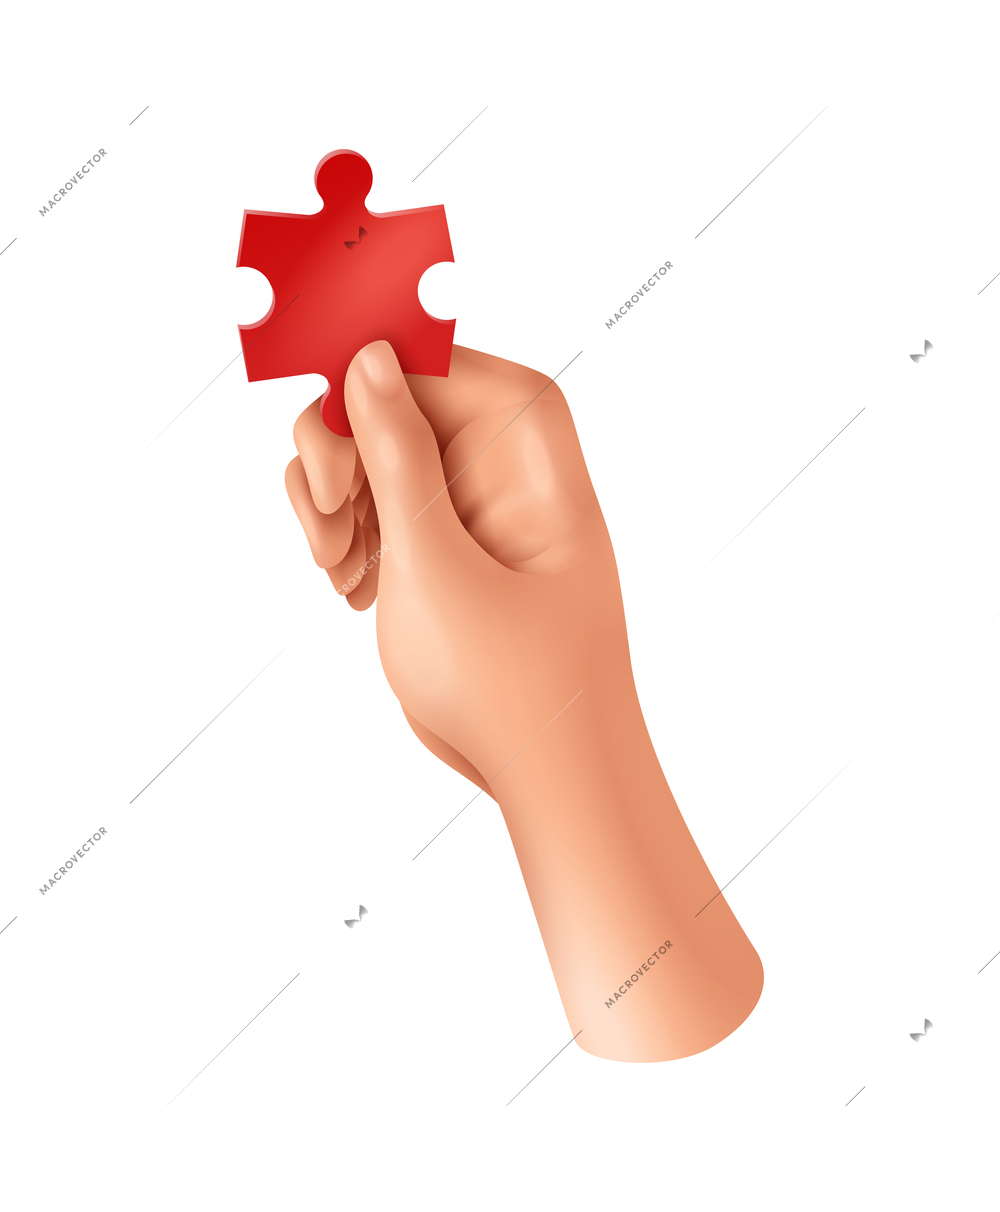 Hands games composition with realistic view of human hand palm on blank background with toy vector illustration